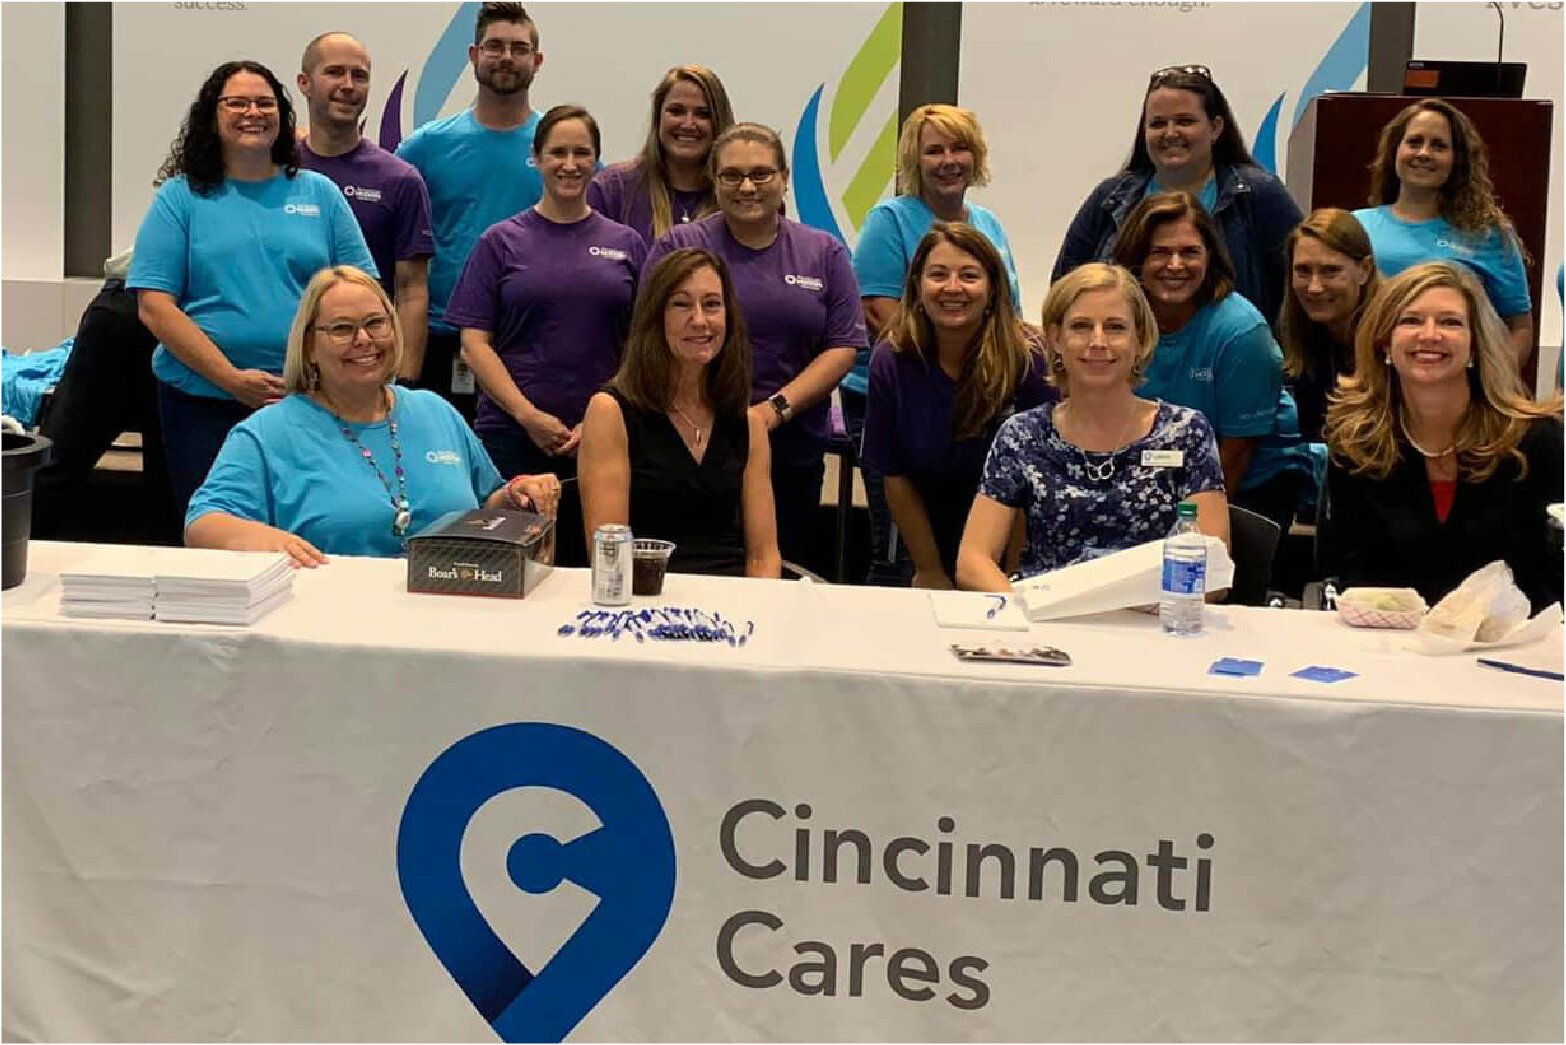 The redesigned site at cincinnaticares.org has gathered data from more than 750 organizations to measure the COVID-19 response's collective impact on community nonprofits.